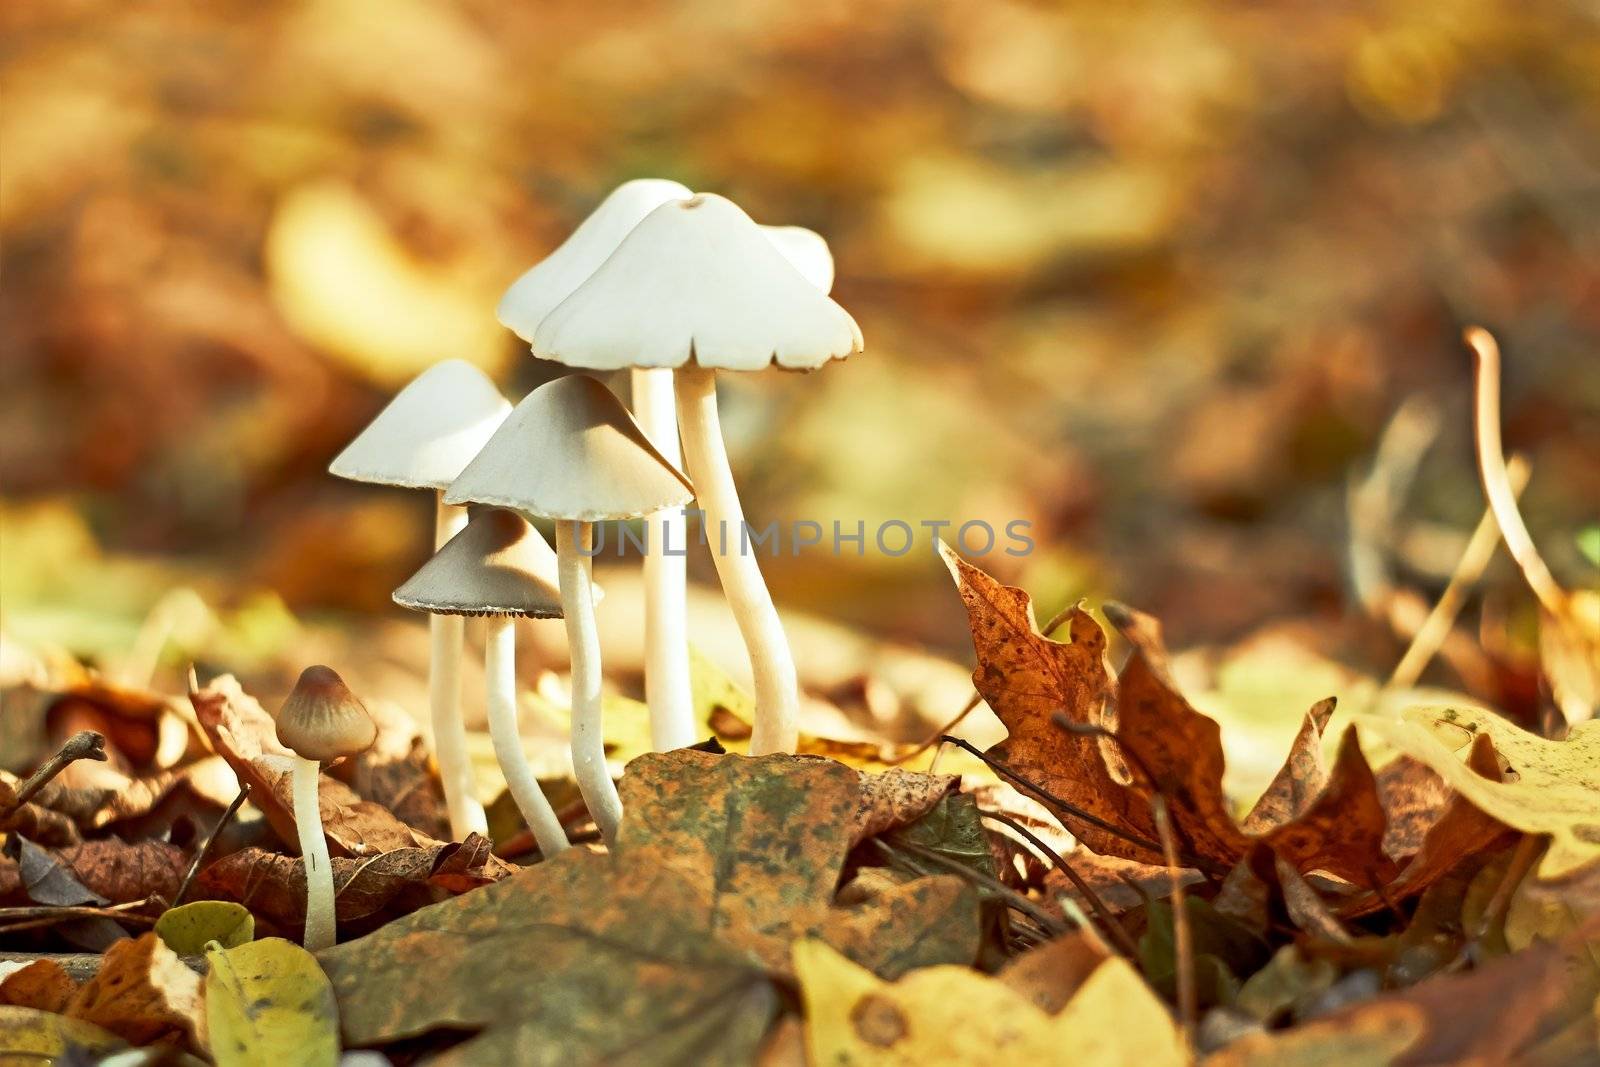 Group of small white mushrooms by qiiip